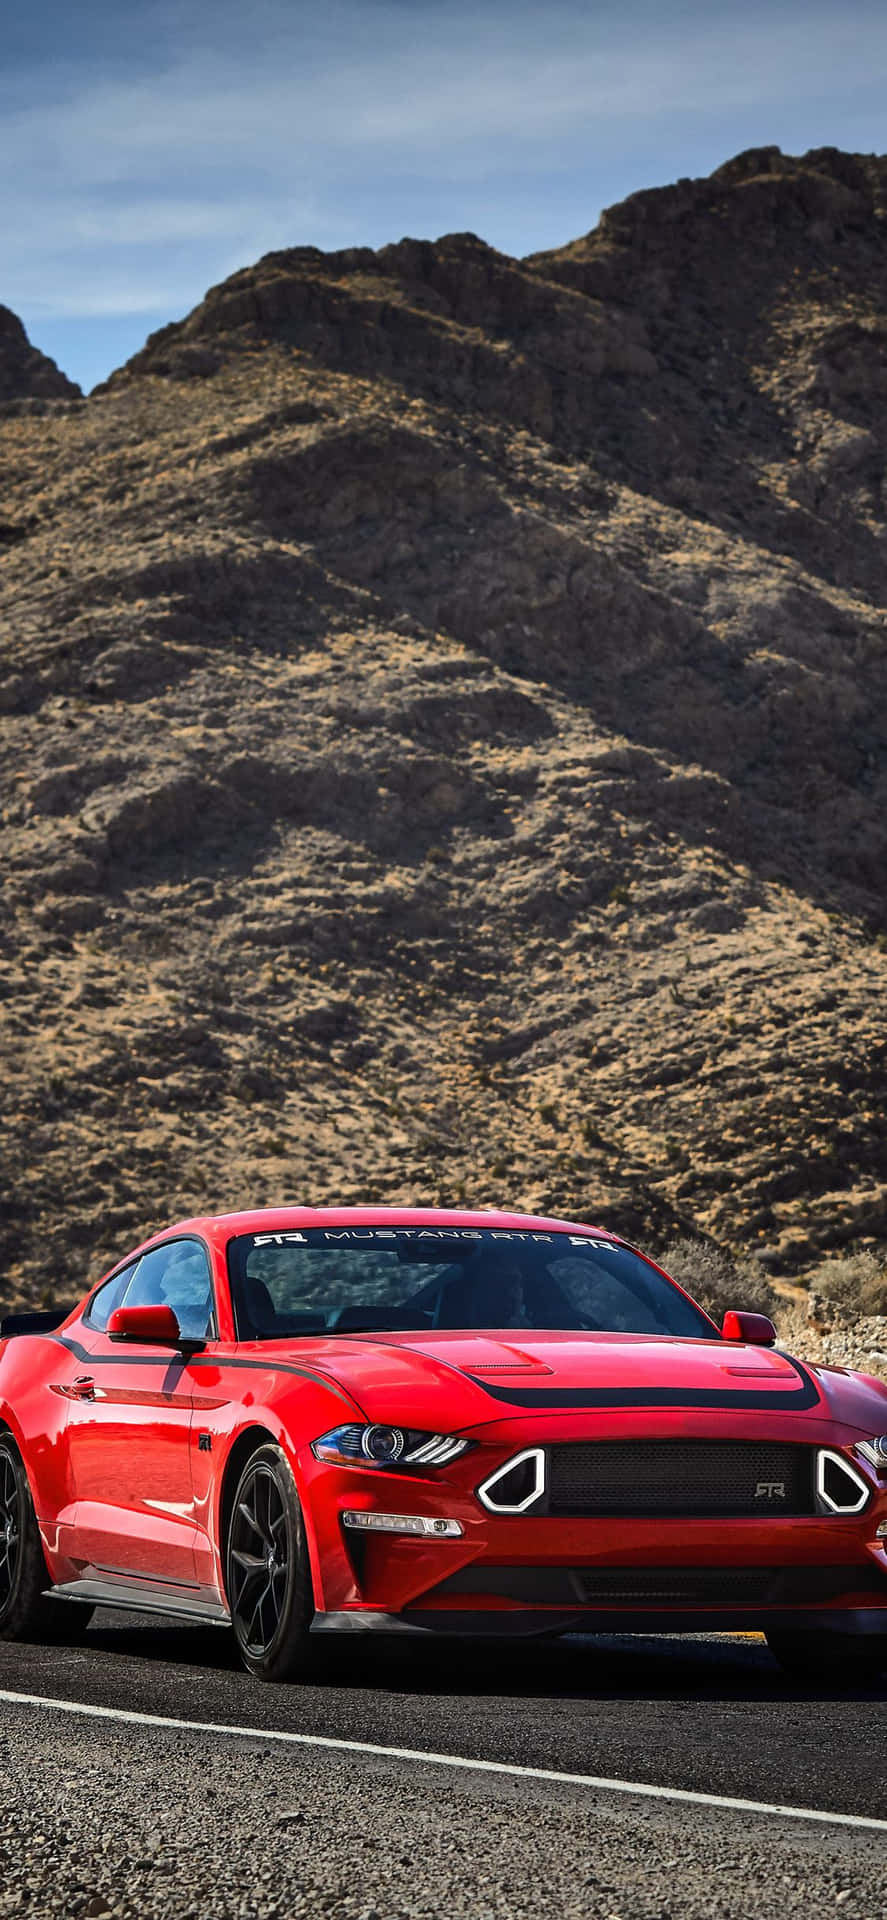 Keep up with the trends with the sleek design of a Mustang iPhone Wallpaper